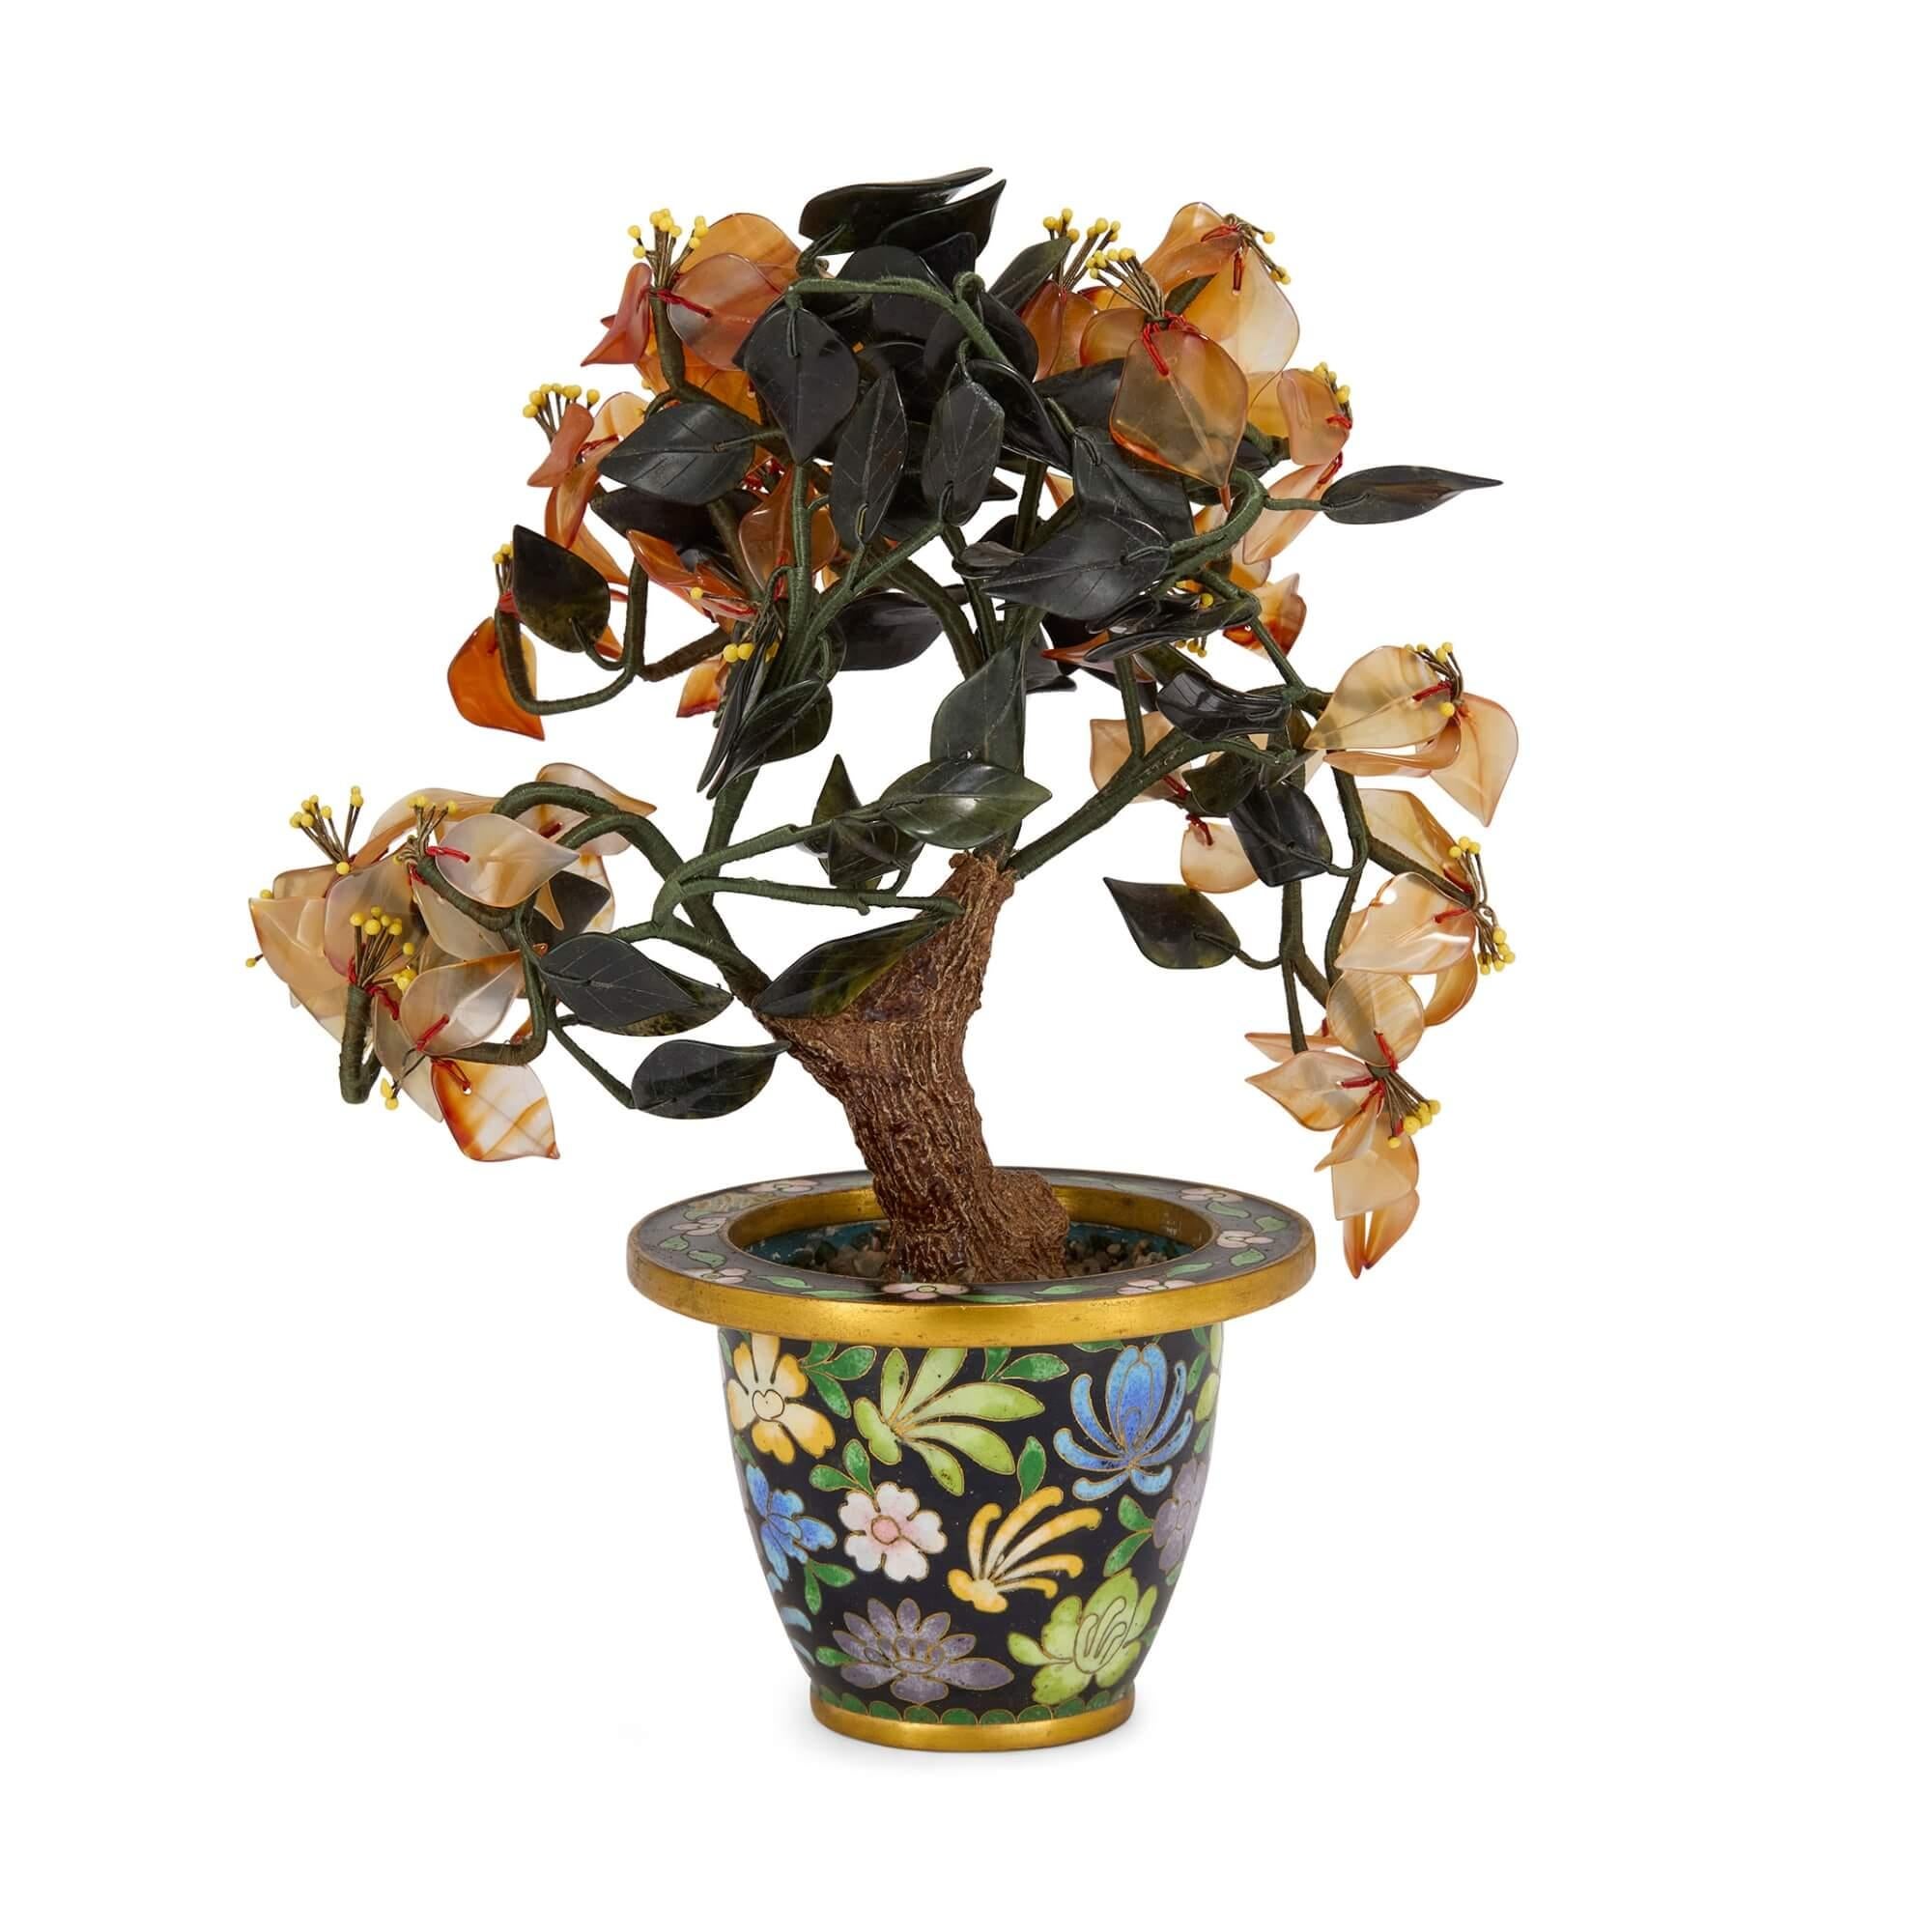 Chinese hardstone flower model in a cloisonné enamel pot
Chinese, 20th Century
Height 20cm, width 16cm, depth 9cm 

Crafted in 20th century China, this charming flower model is crafted from various materials such as carnelian, jade, and cloisonné